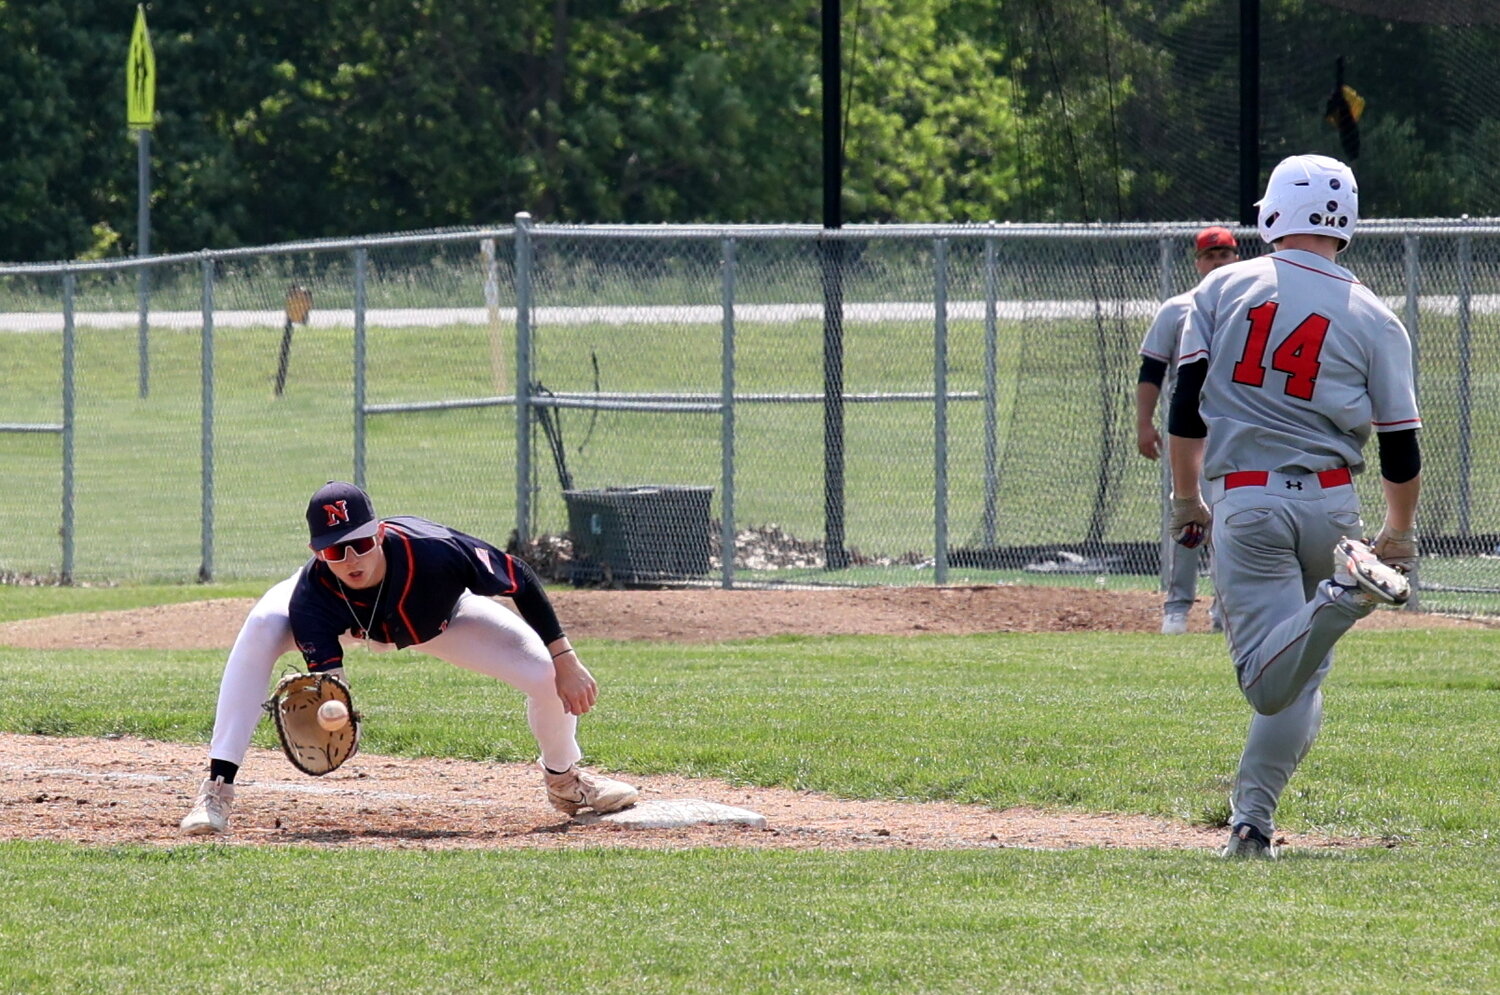 Jarrod Kirsch fields his spot at first base for North Montgomery. The Chargers took down county rival Southmont 8-4 Saturday afternoon concluding the postponed game from Friday night.